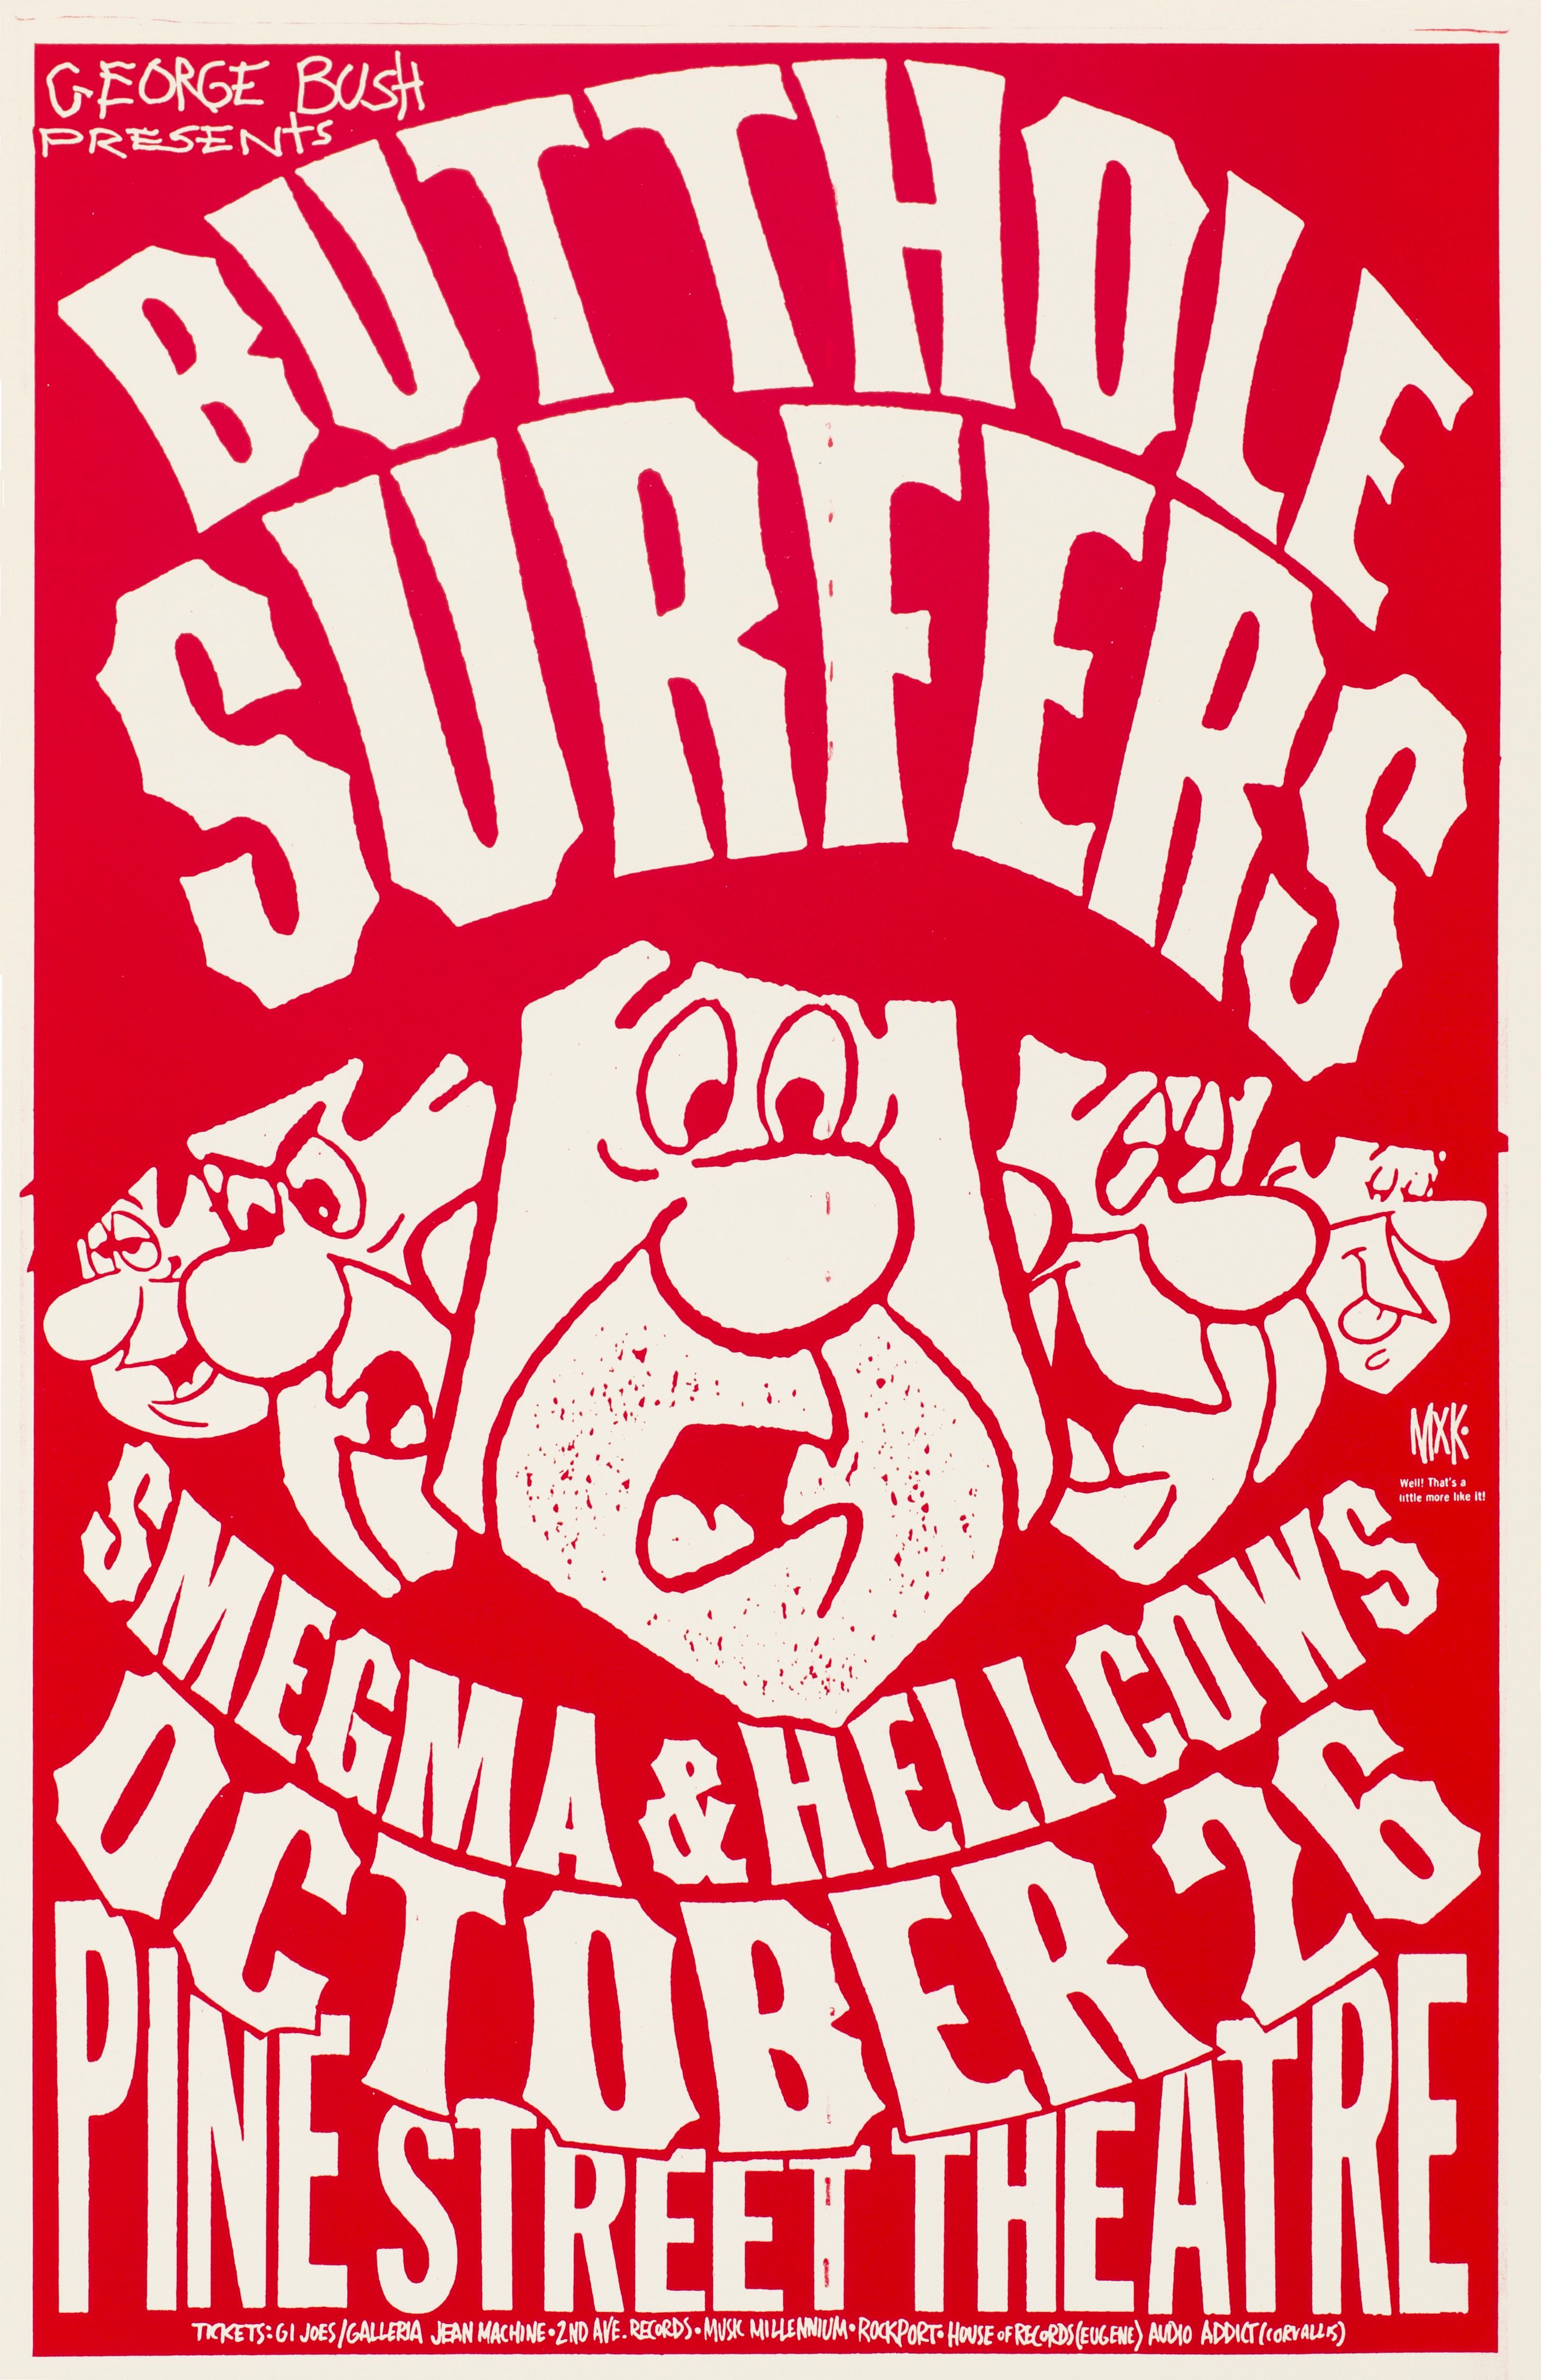 MXP-49.2 Butthole Surfers Pine Street Theatre 1987 Red/White Variant Concert Poster